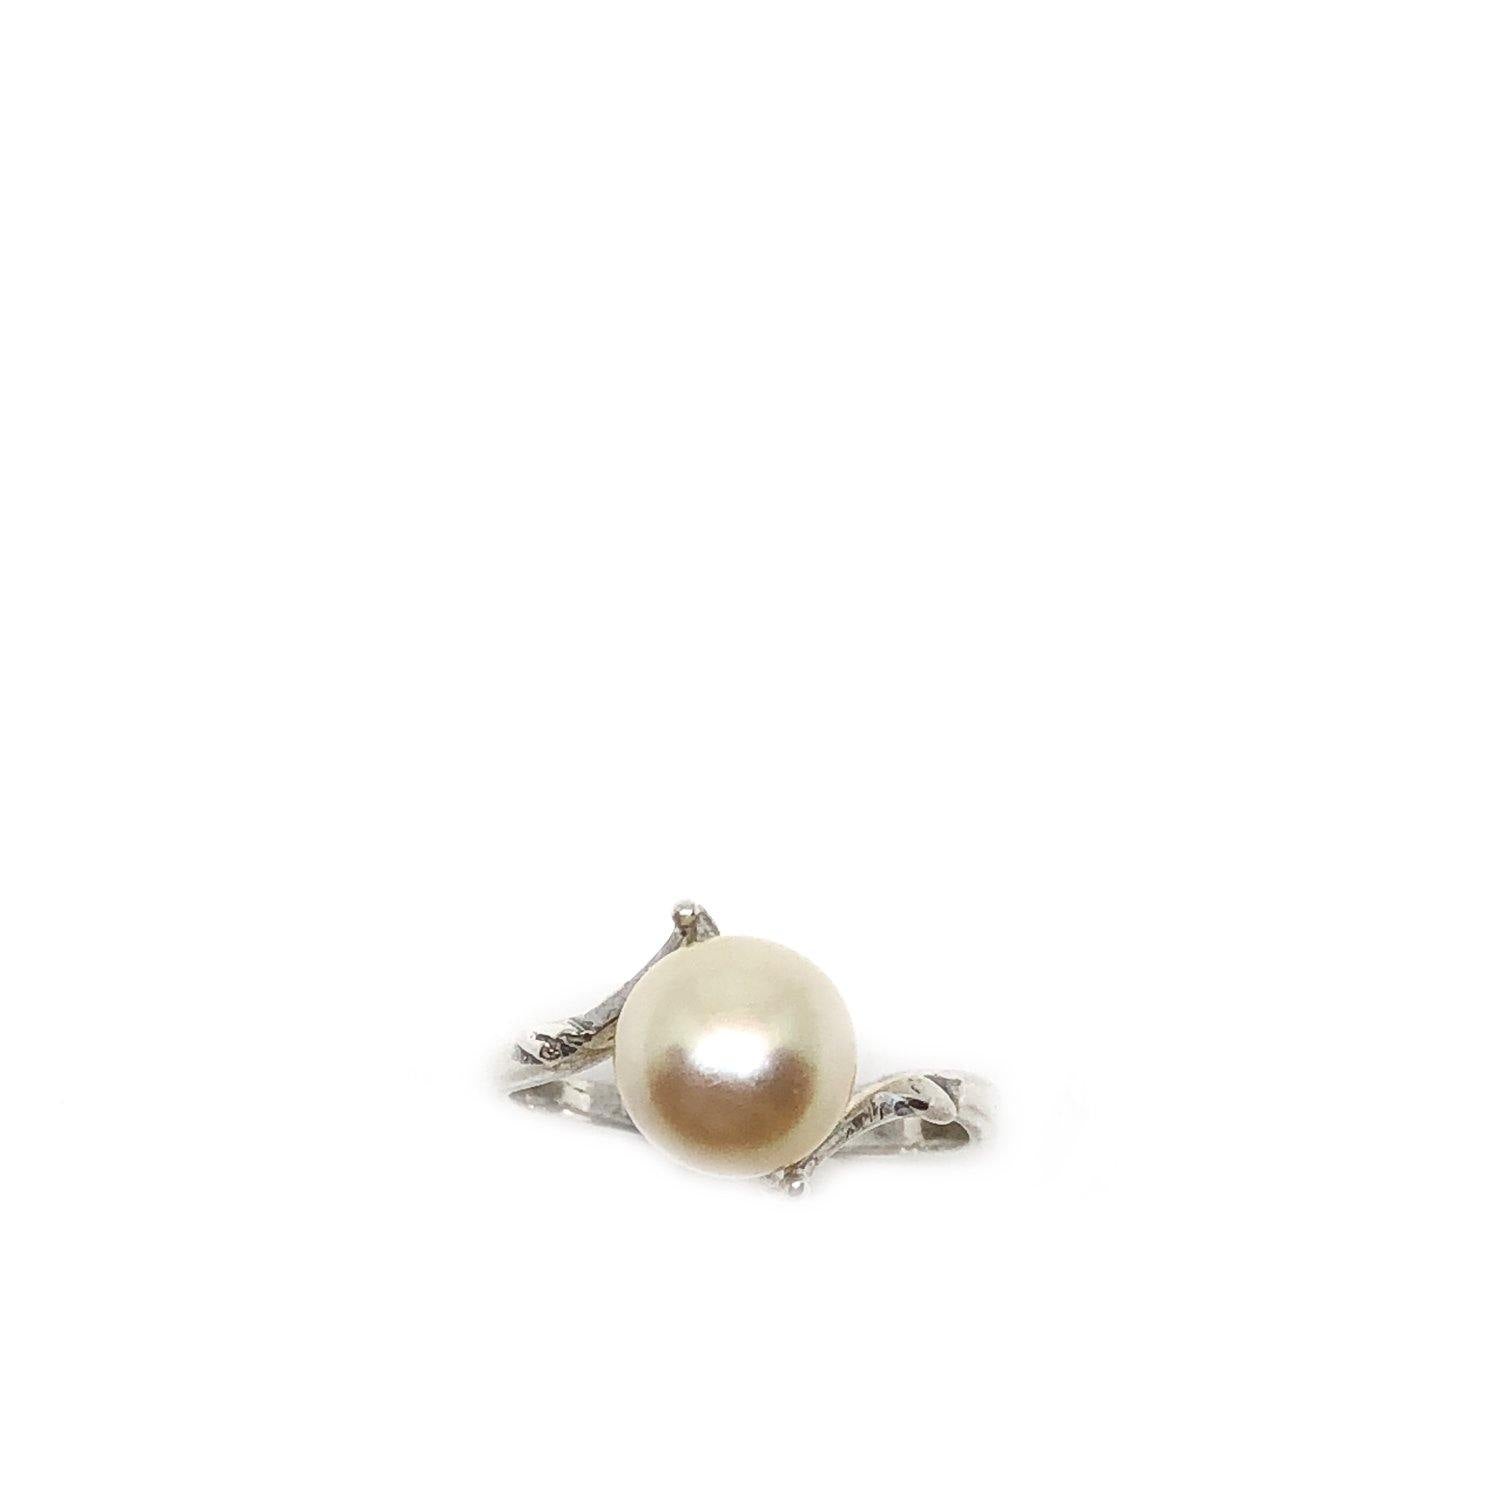 Petite Japanese Saltwater Cultured Yellow Akoya Pearl Ring- Sterling Silver Sz 4 1/2 - Vintage Valuable Pearls